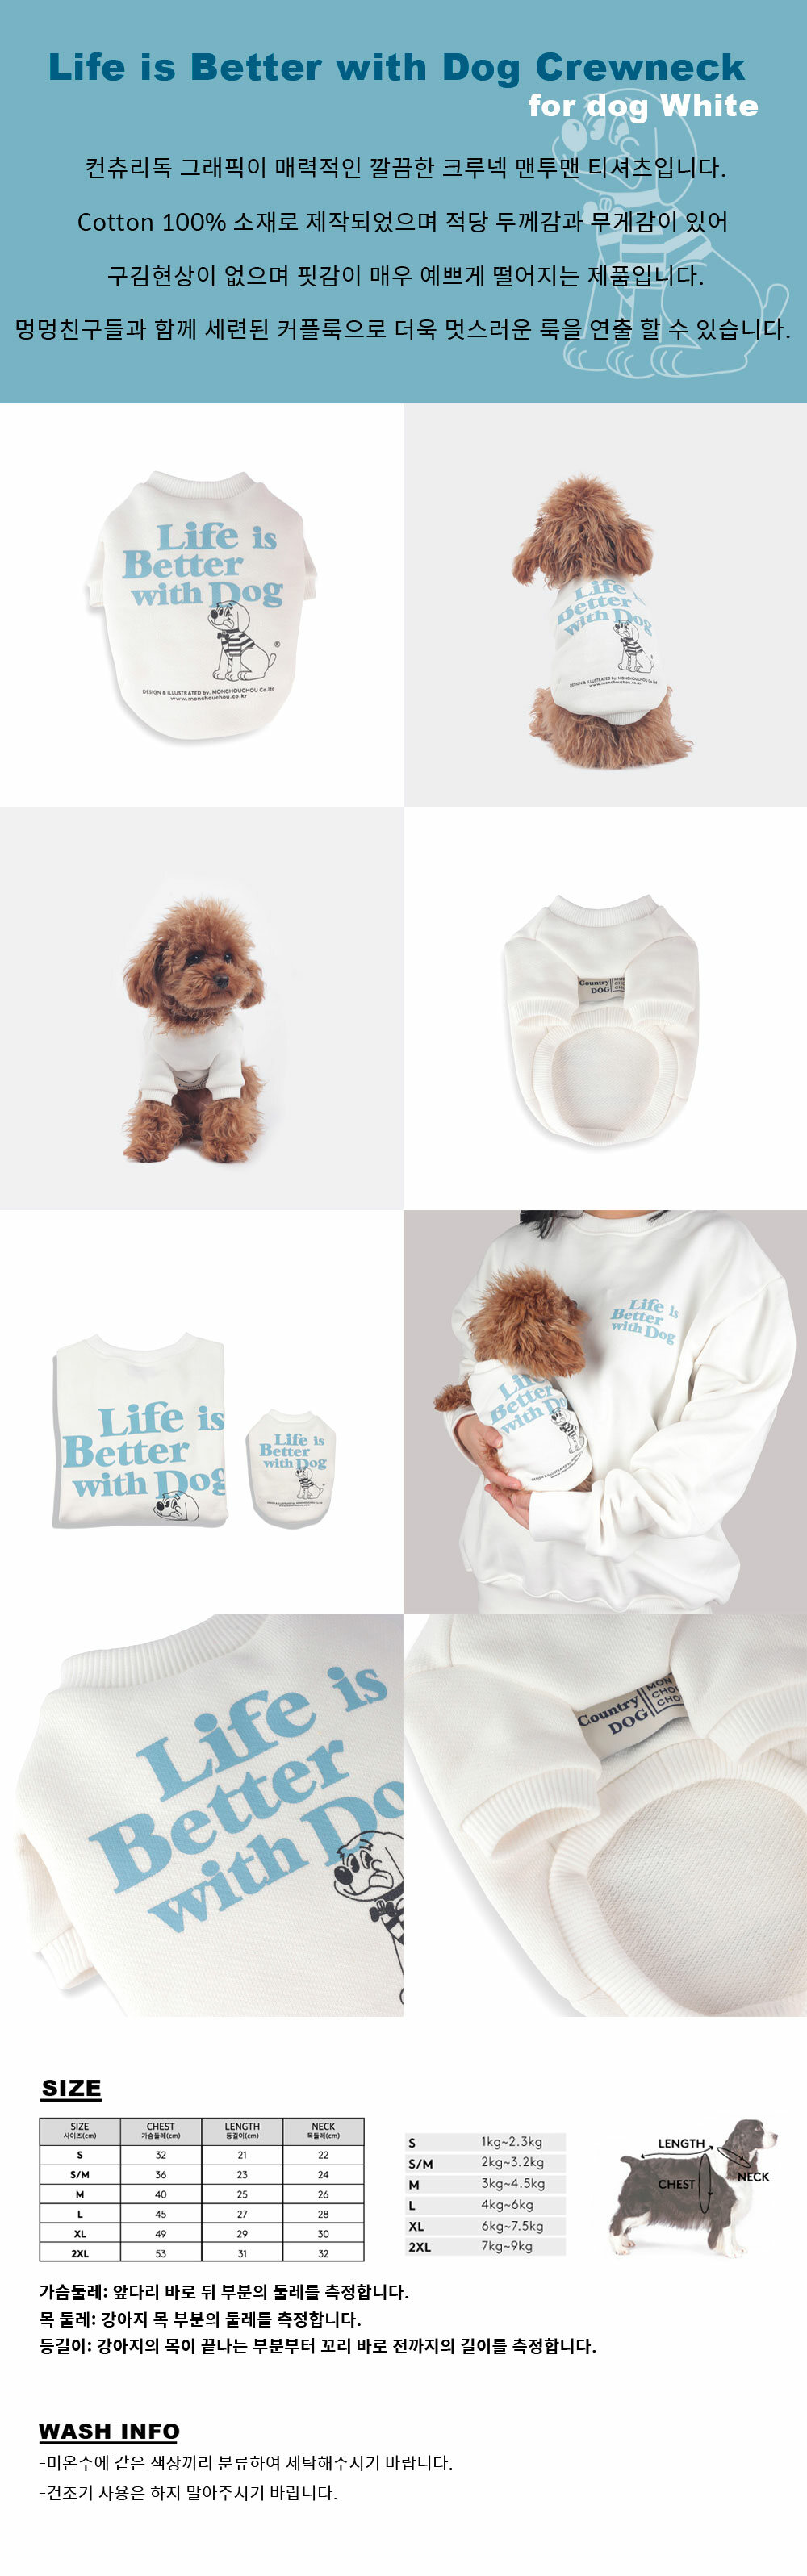 Life-is-Better-with-Dog-Crewneck-for-Dog-White-Info.jpg